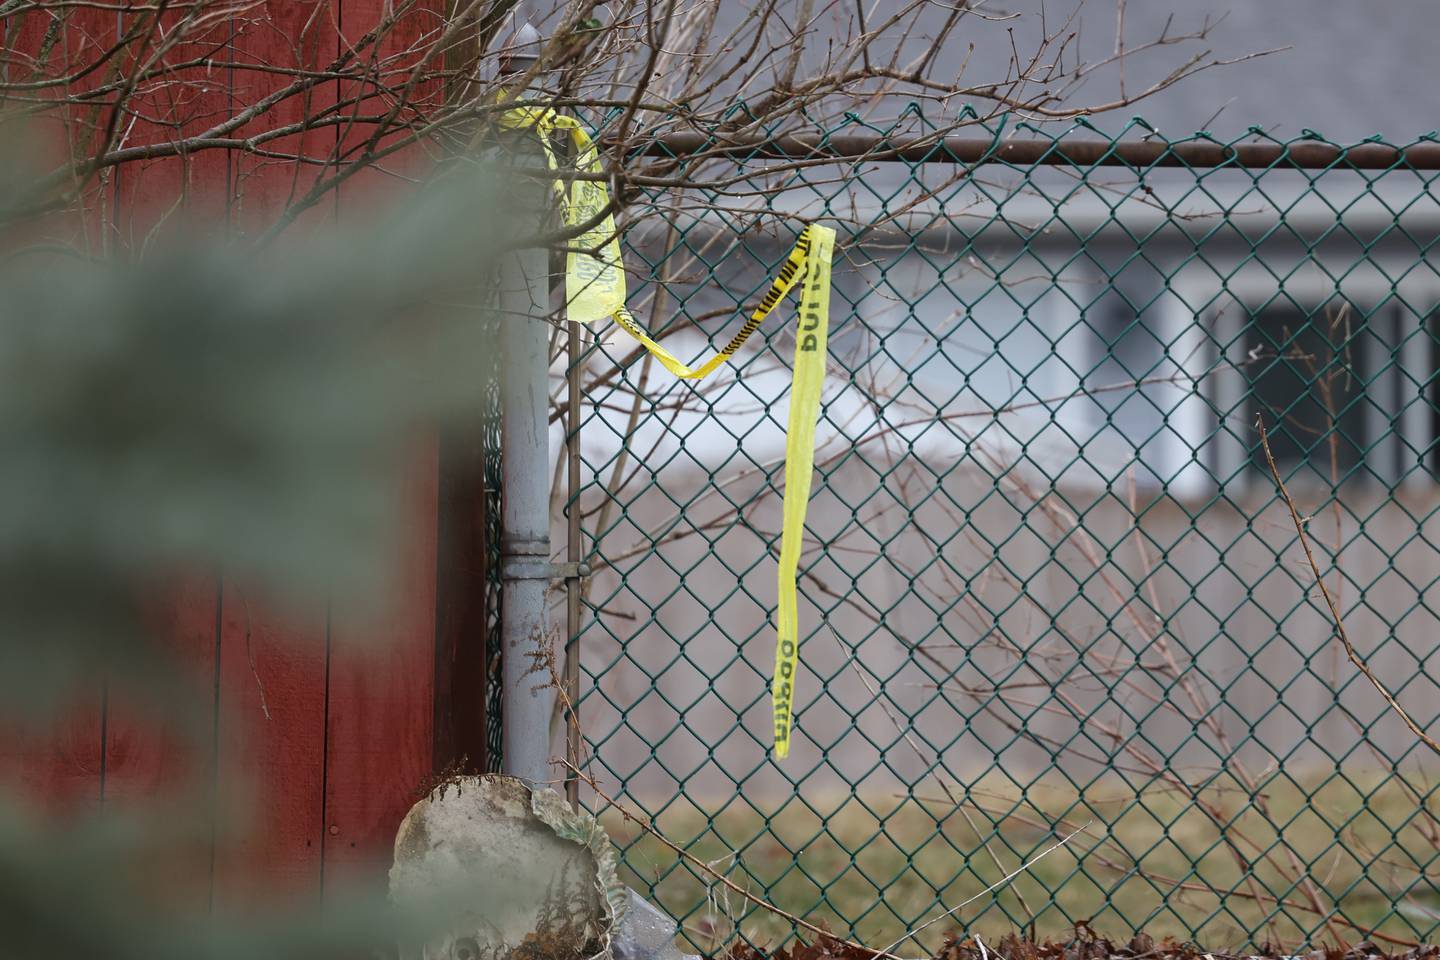 Police tape hangs on the fence at the scene of three fatalities in a possible home invasion along the 100 block of Lee Lane on Sunday, March 5th, 2023 in Bolingbrook.